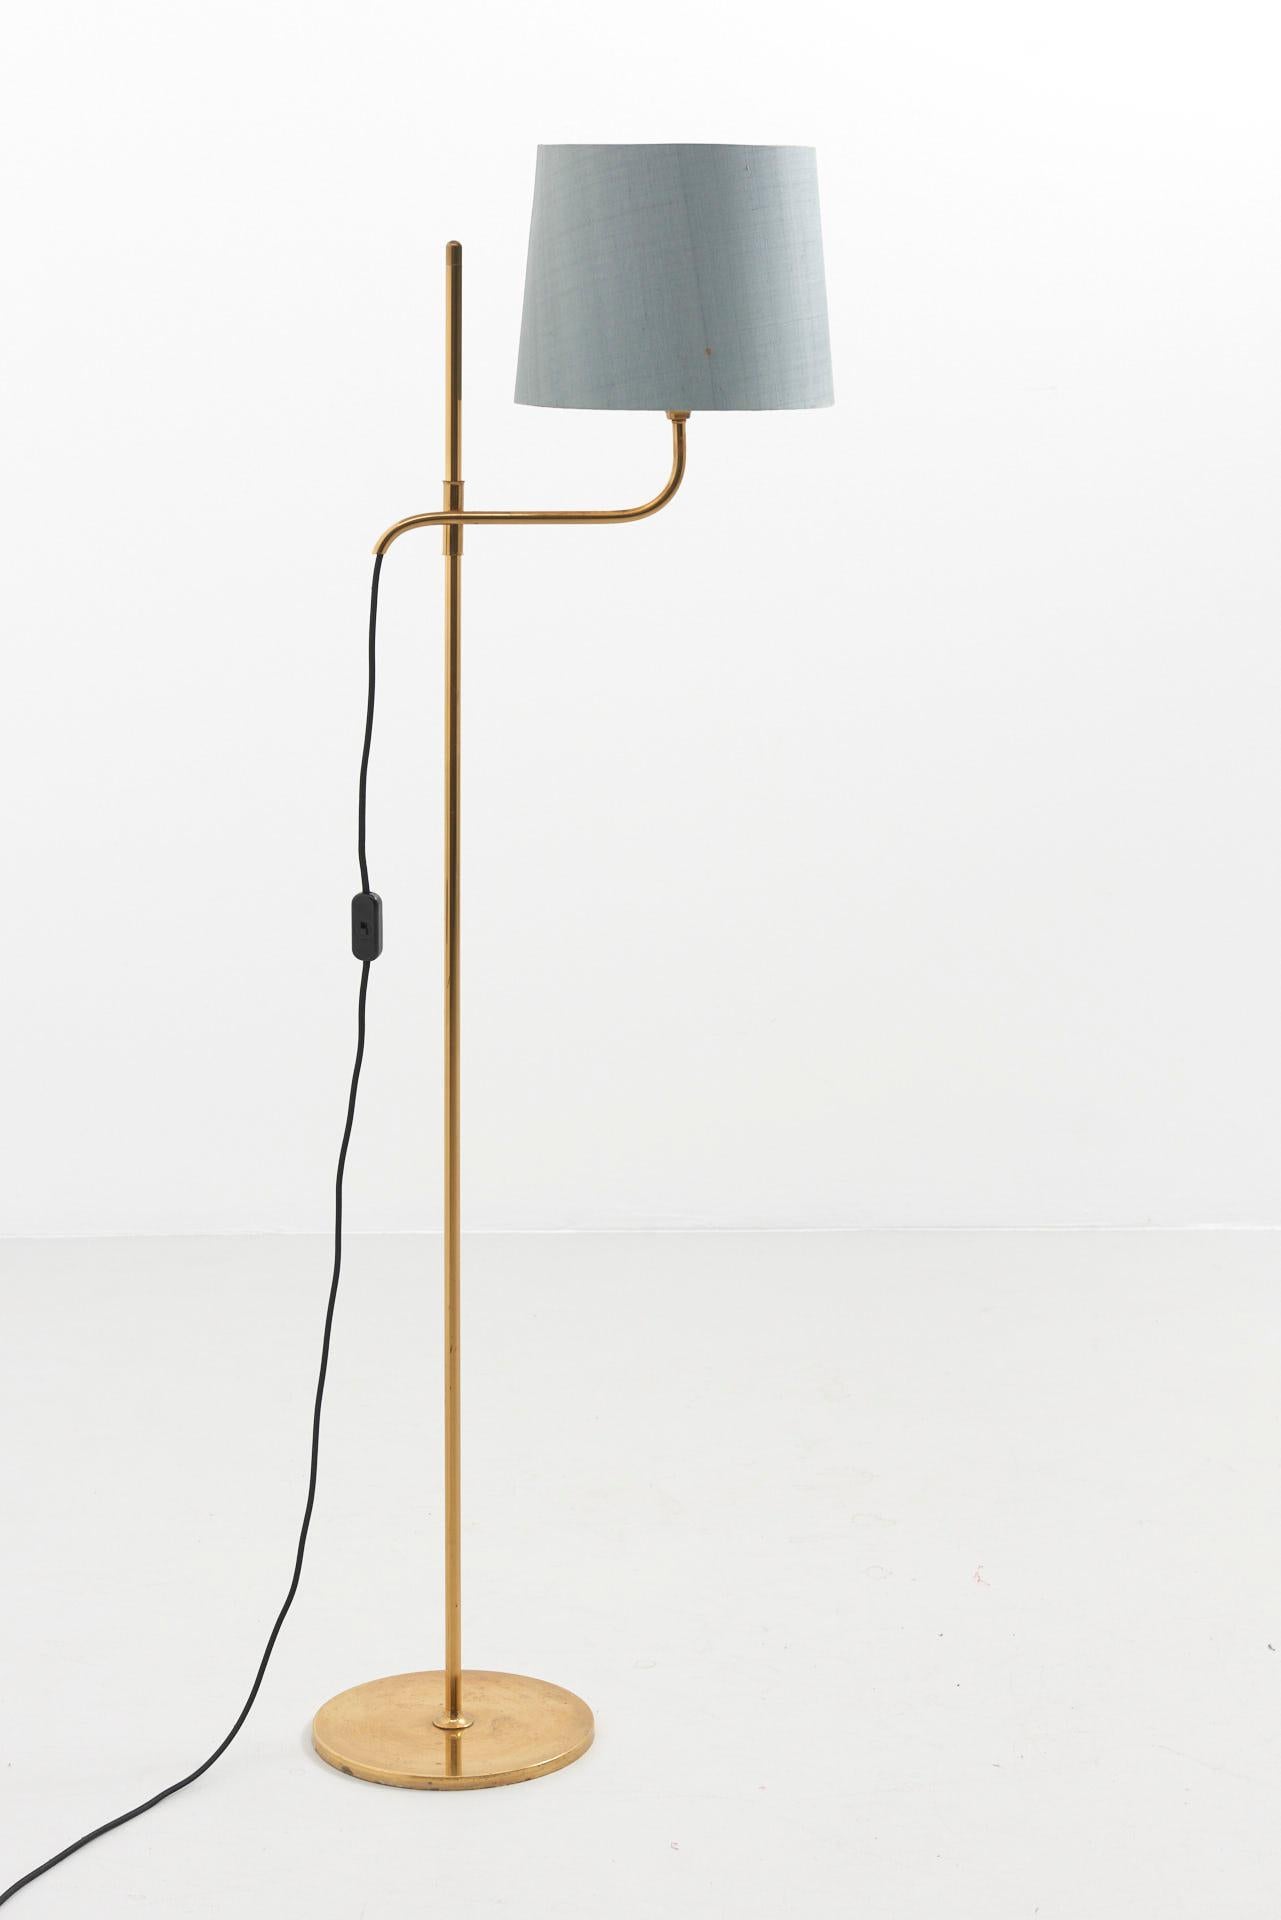 A floor lamp in brass with light blue lamp shade. Adjustable in height. Design by Florian Schulz, made in Germany.